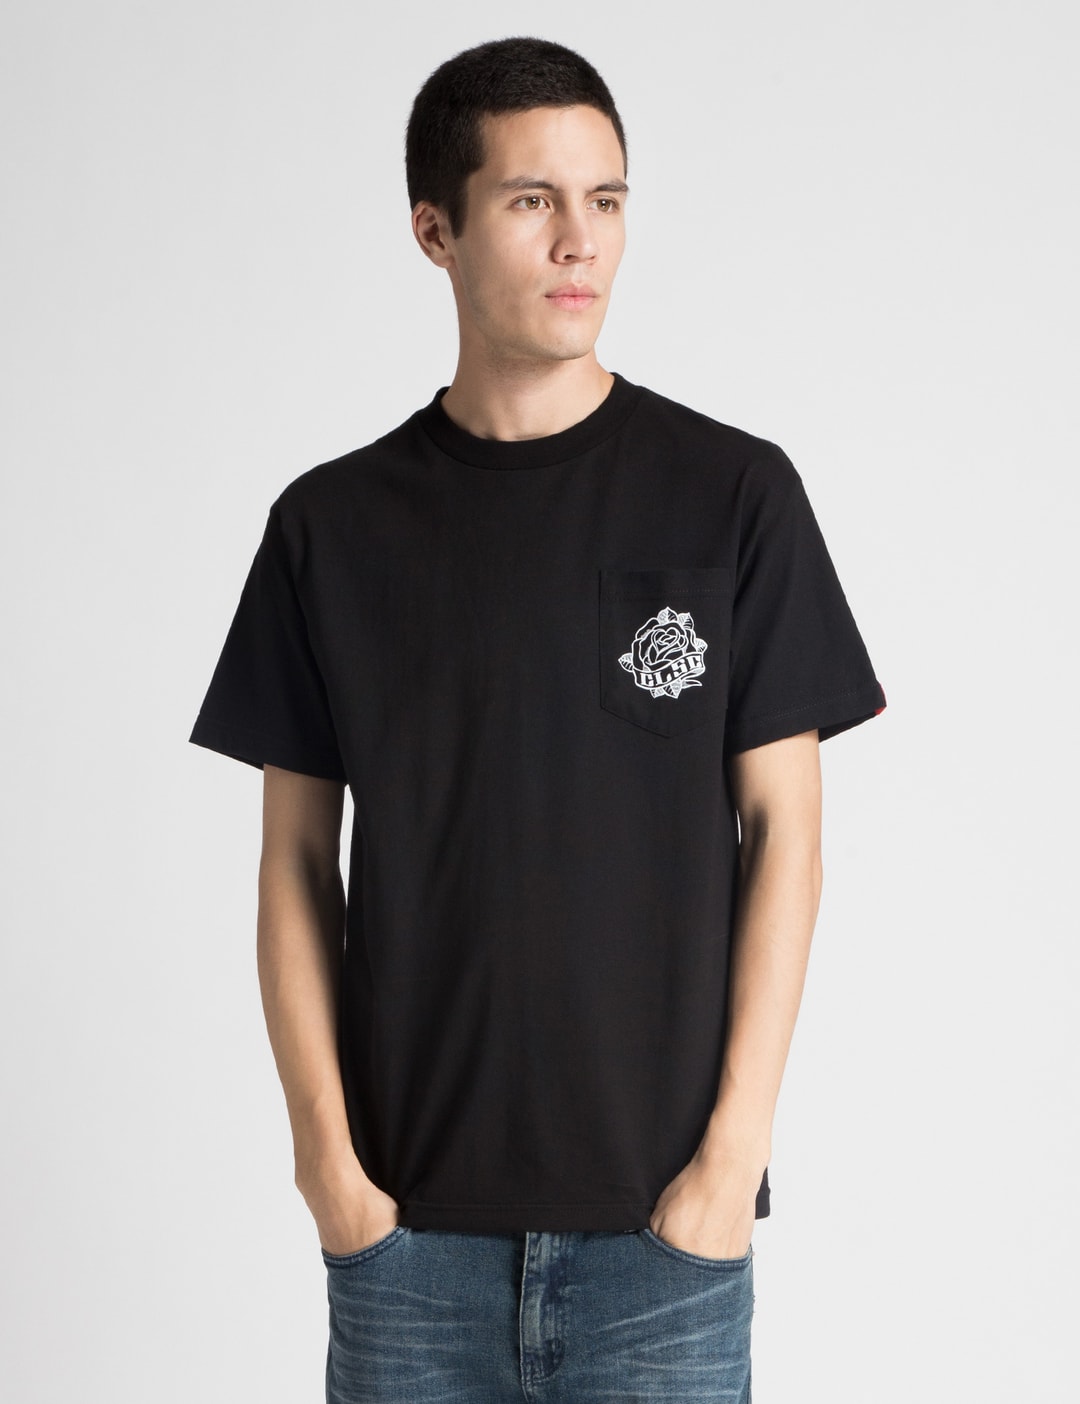 Clsc - Black Rose T-Shirt | HBX - Globally Curated Fashion and ...